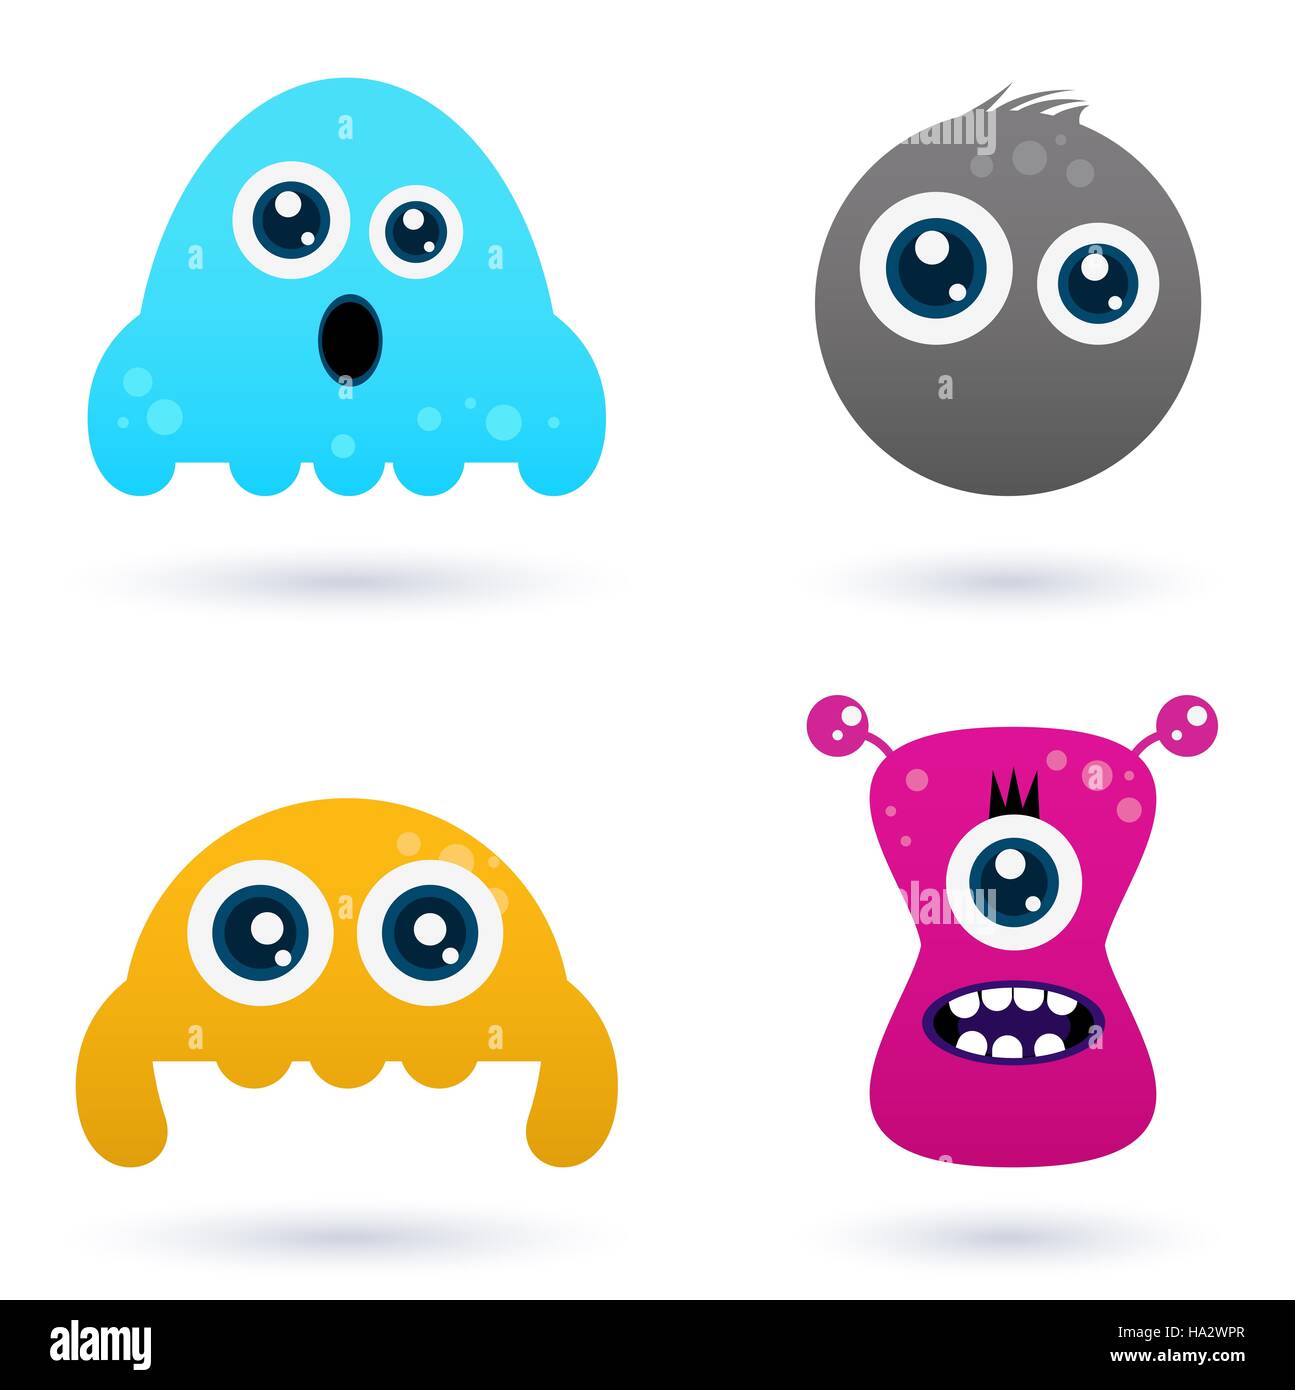 11659945 - cute monster or germs characters collection. vector cartoon illustration Stock Photo